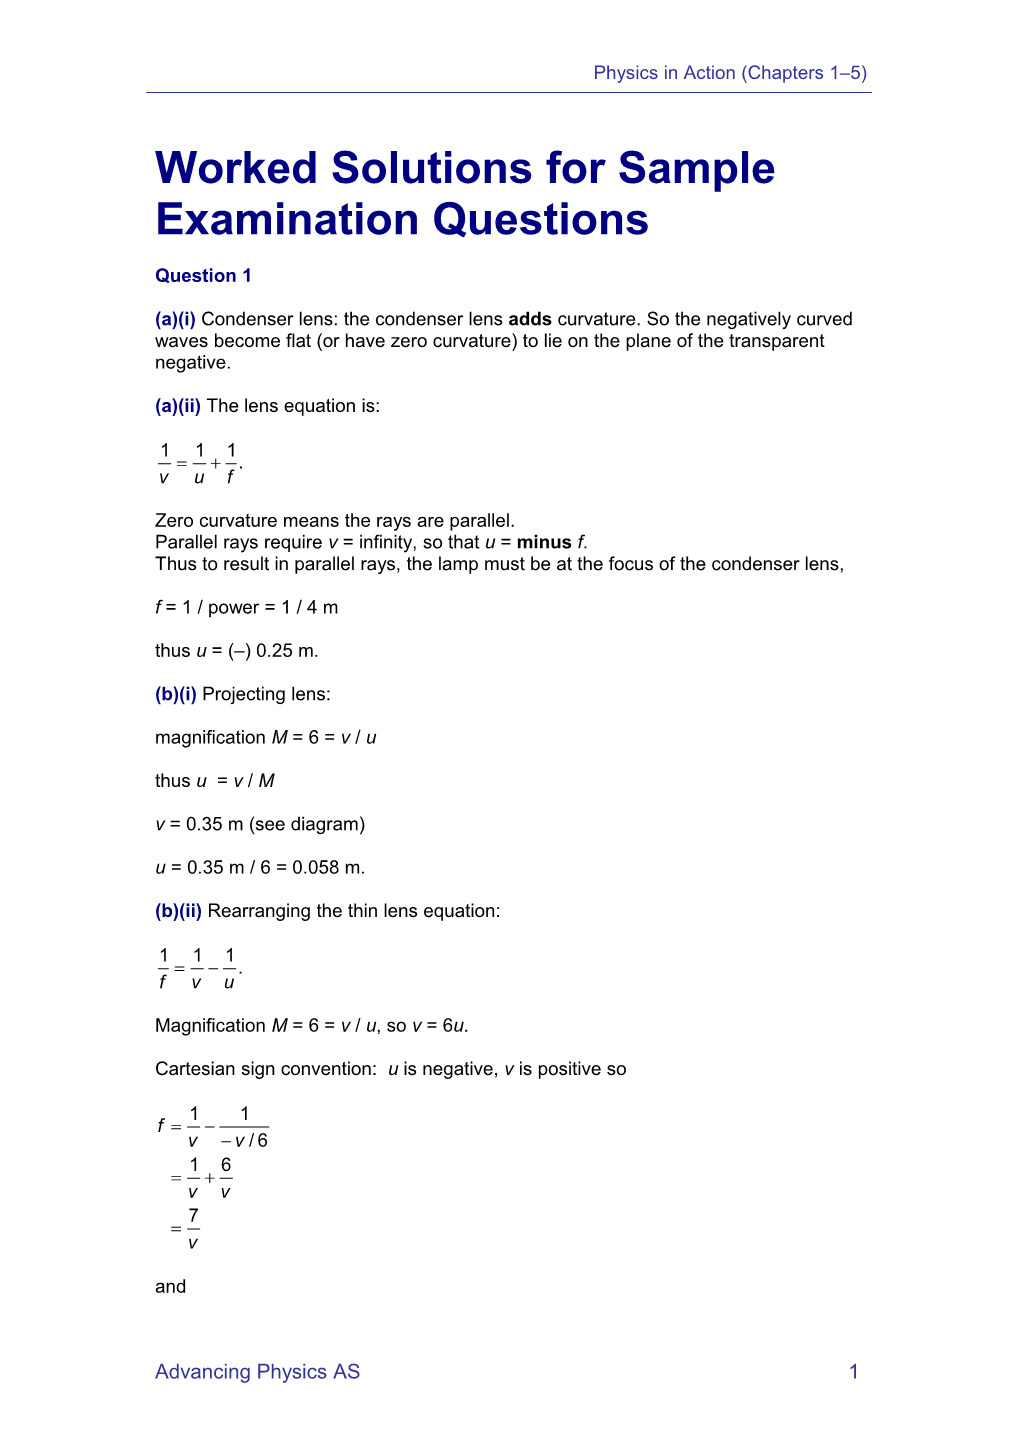 AP Revision Guide Worked Solutions Ch 1-5